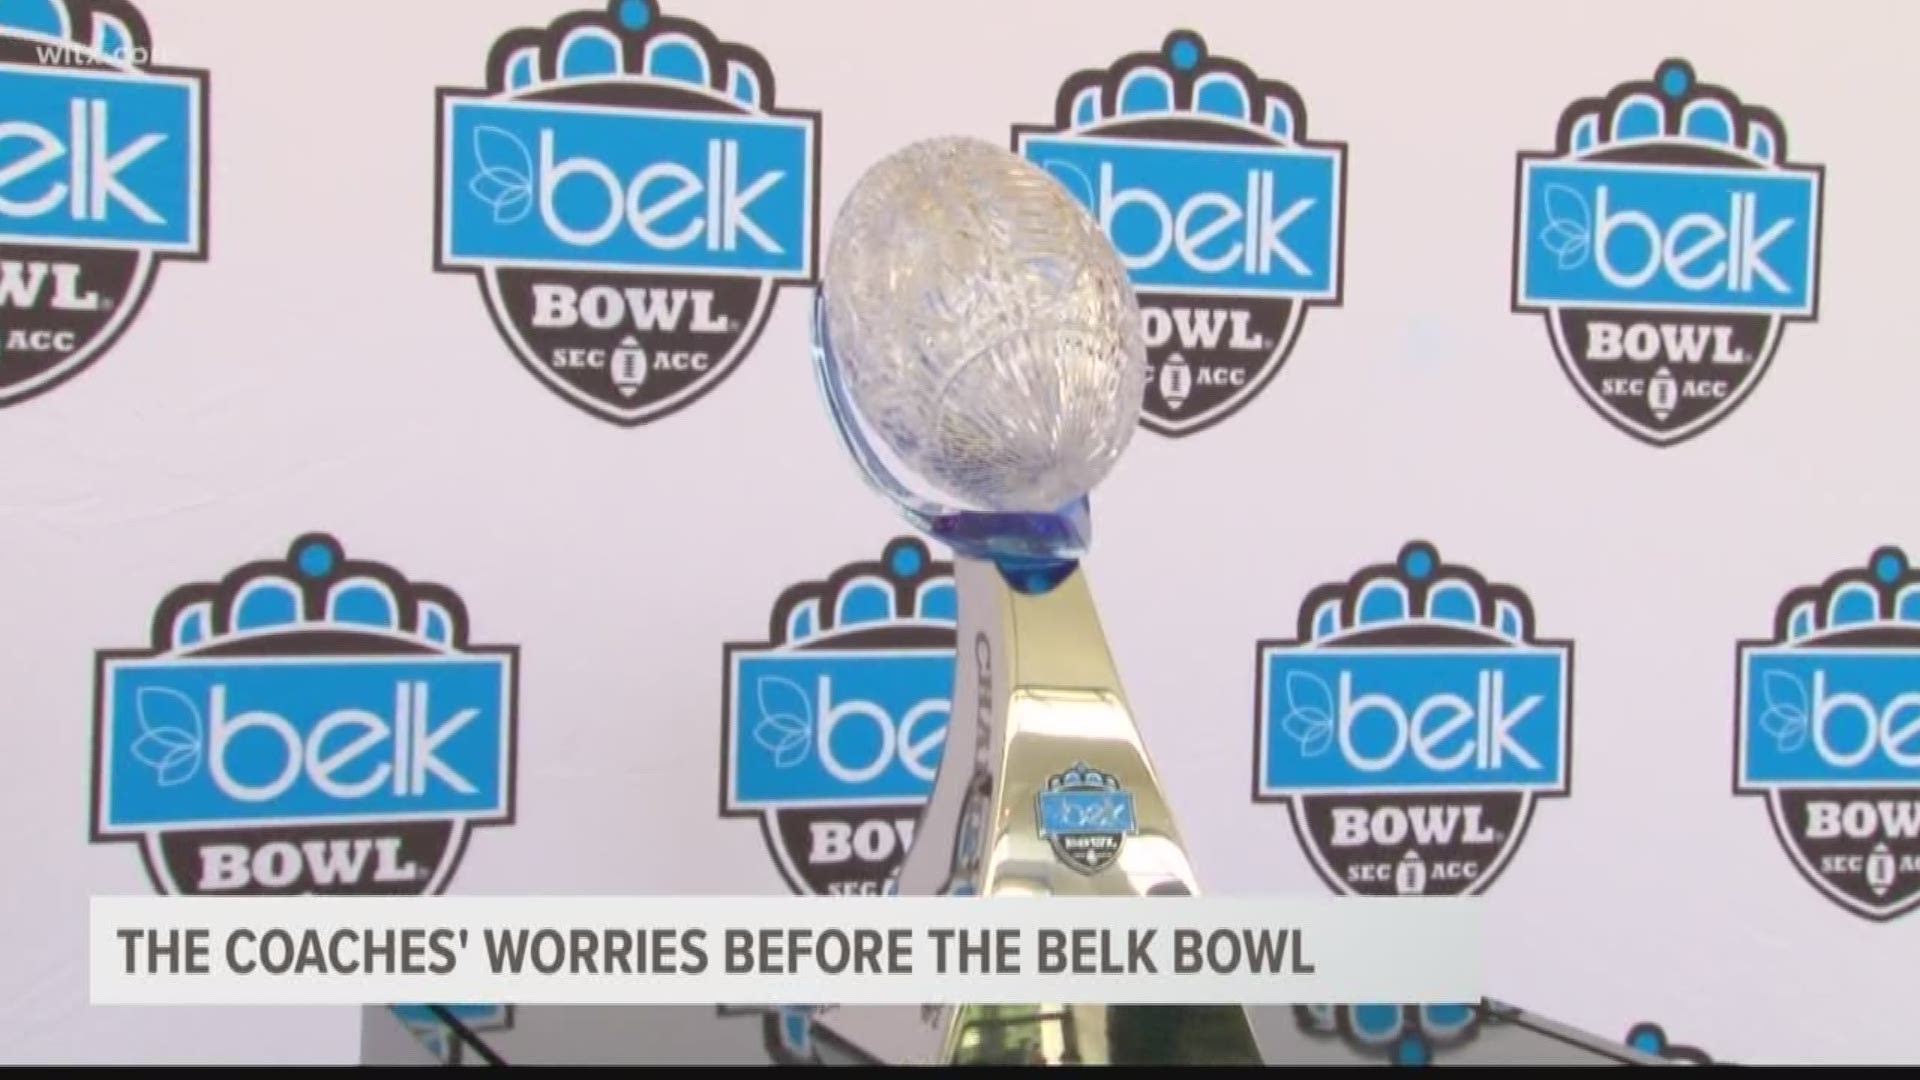 USC head football coach Will Muschamp and Virginia's Bronco Mendenhall met the media Friday, one day before the Belk Bowl kickoff.